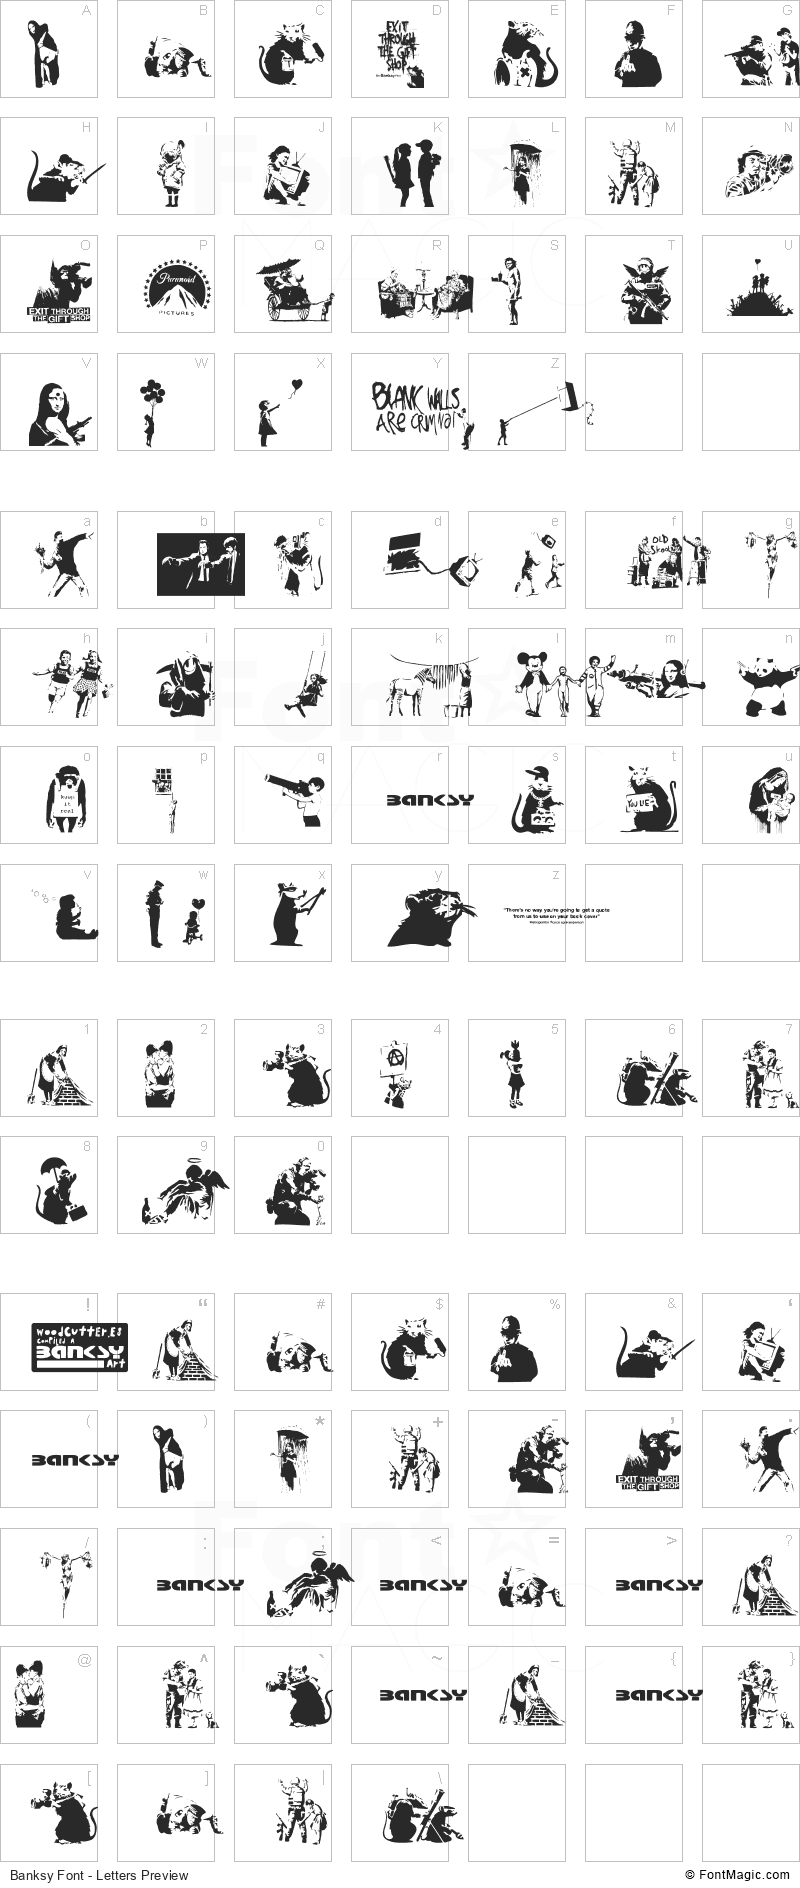 Banksy Font - All Latters Preview Chart